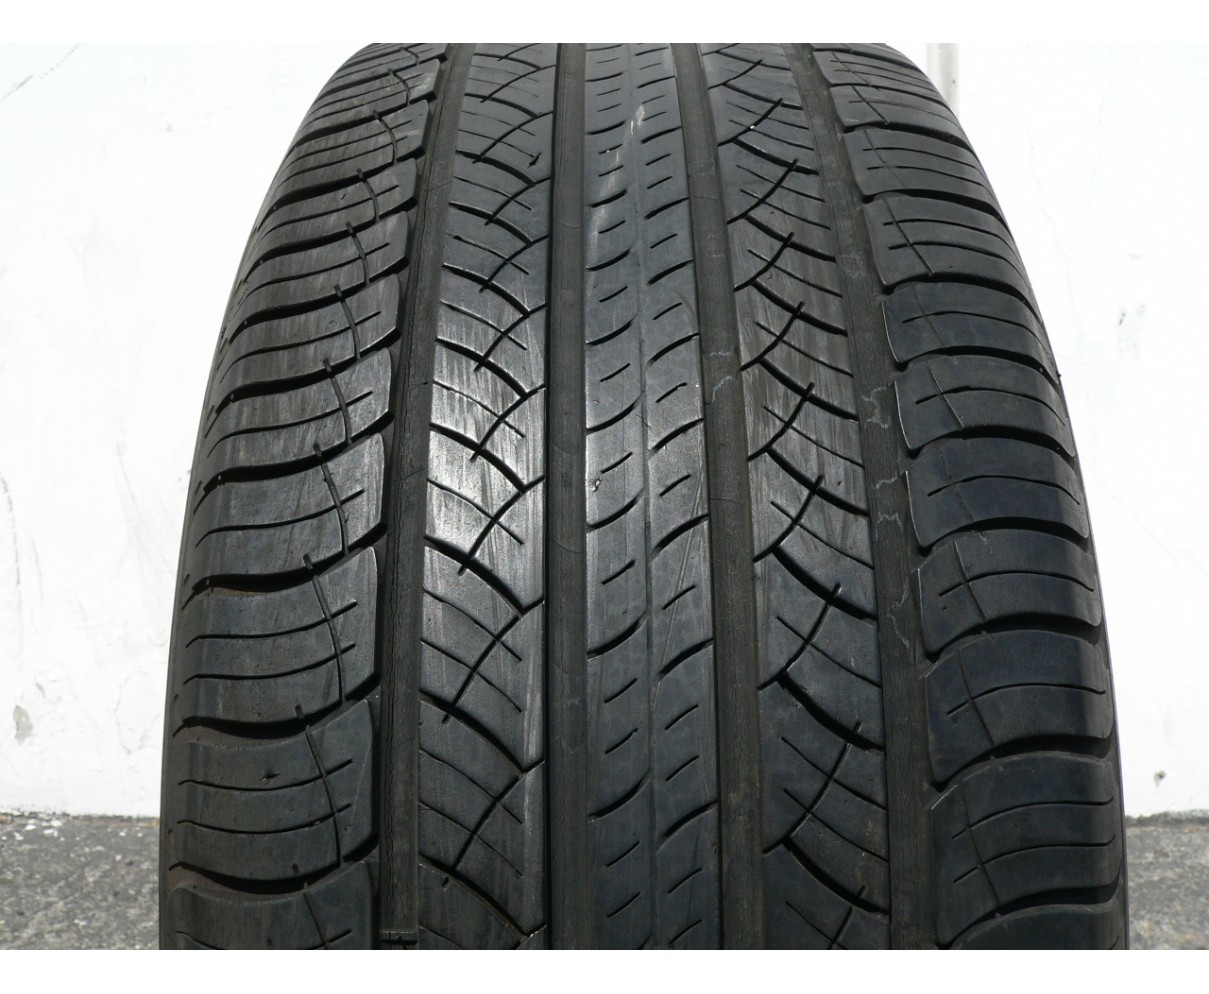 105V HP Latitude 255 tires 60% Michelin used 55 18 2 life Tour